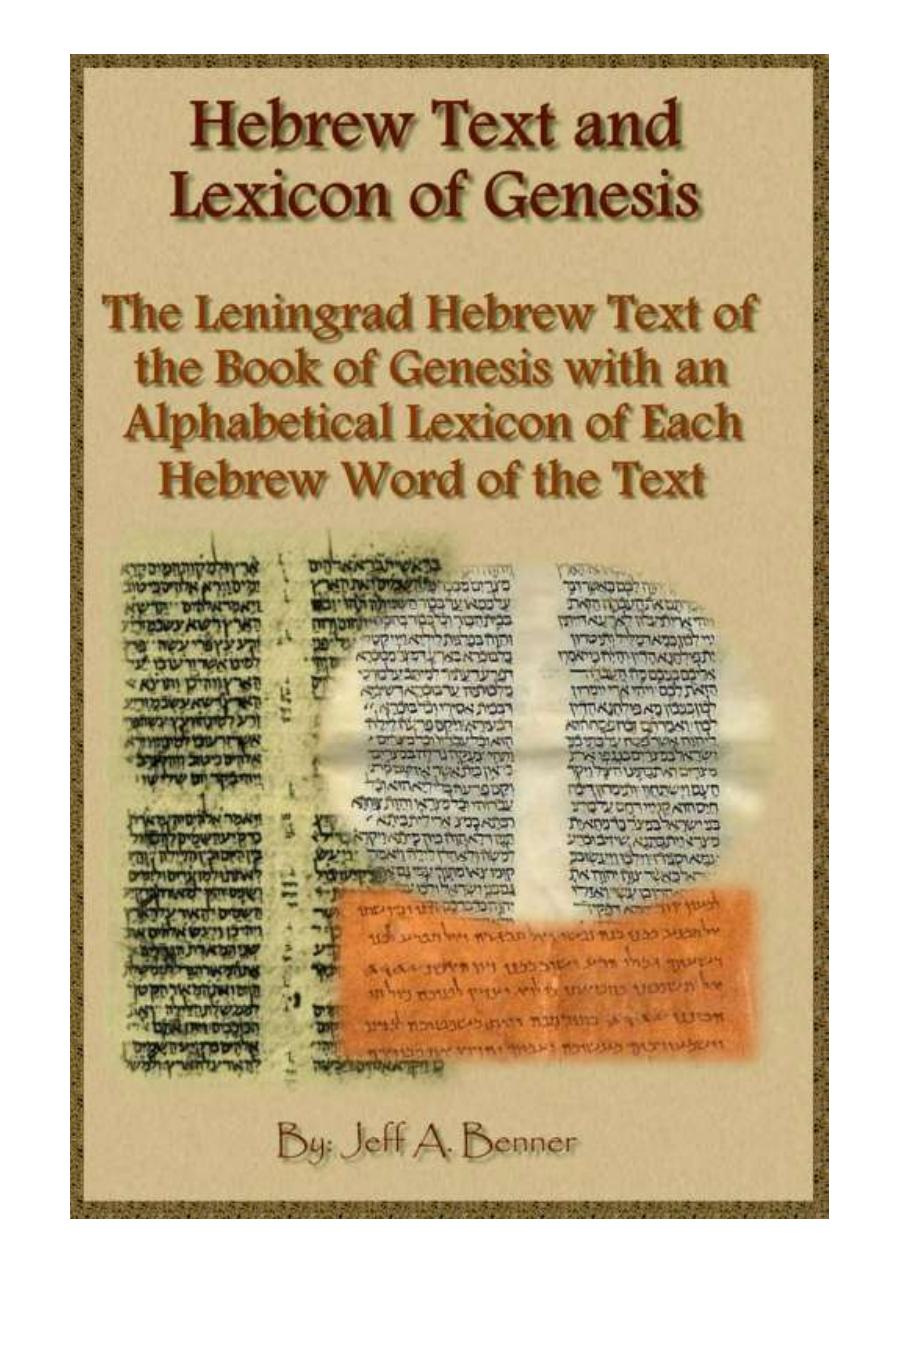 Alphabetical Lexicon of the Words of Genesis